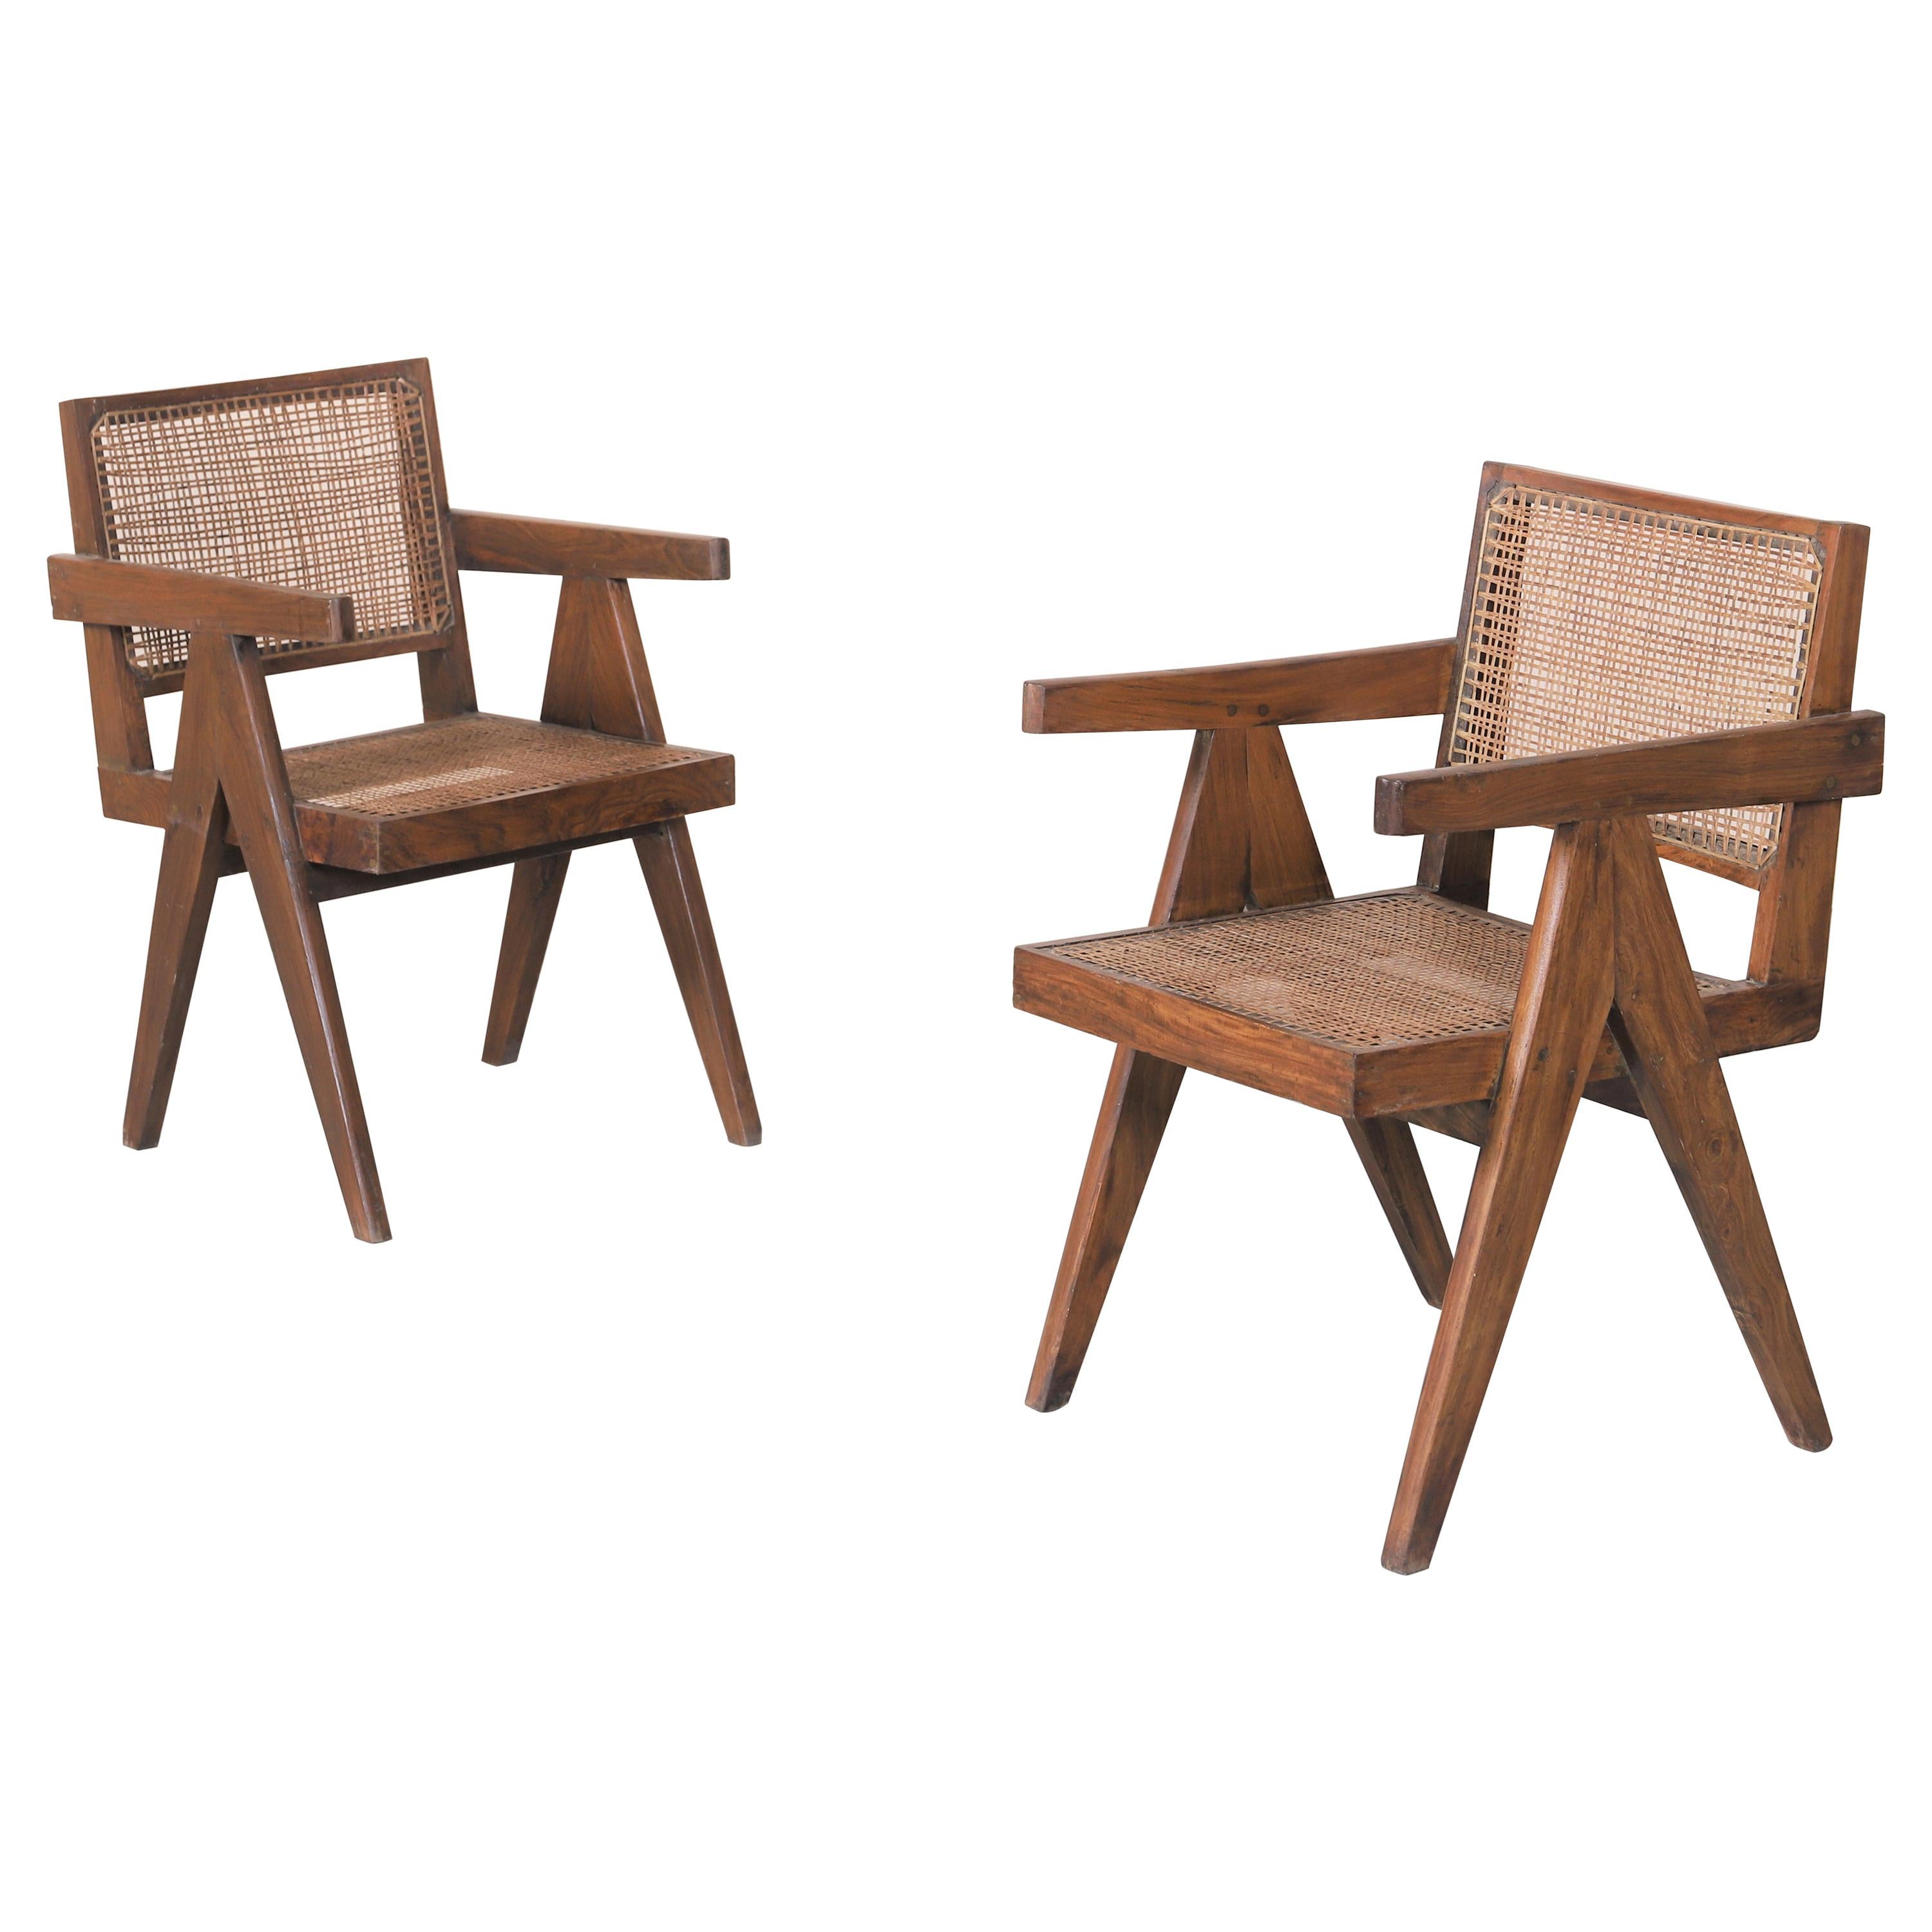 Set of Two "Office Cane Chairs" circa 1955 by Pierre Jeanneret